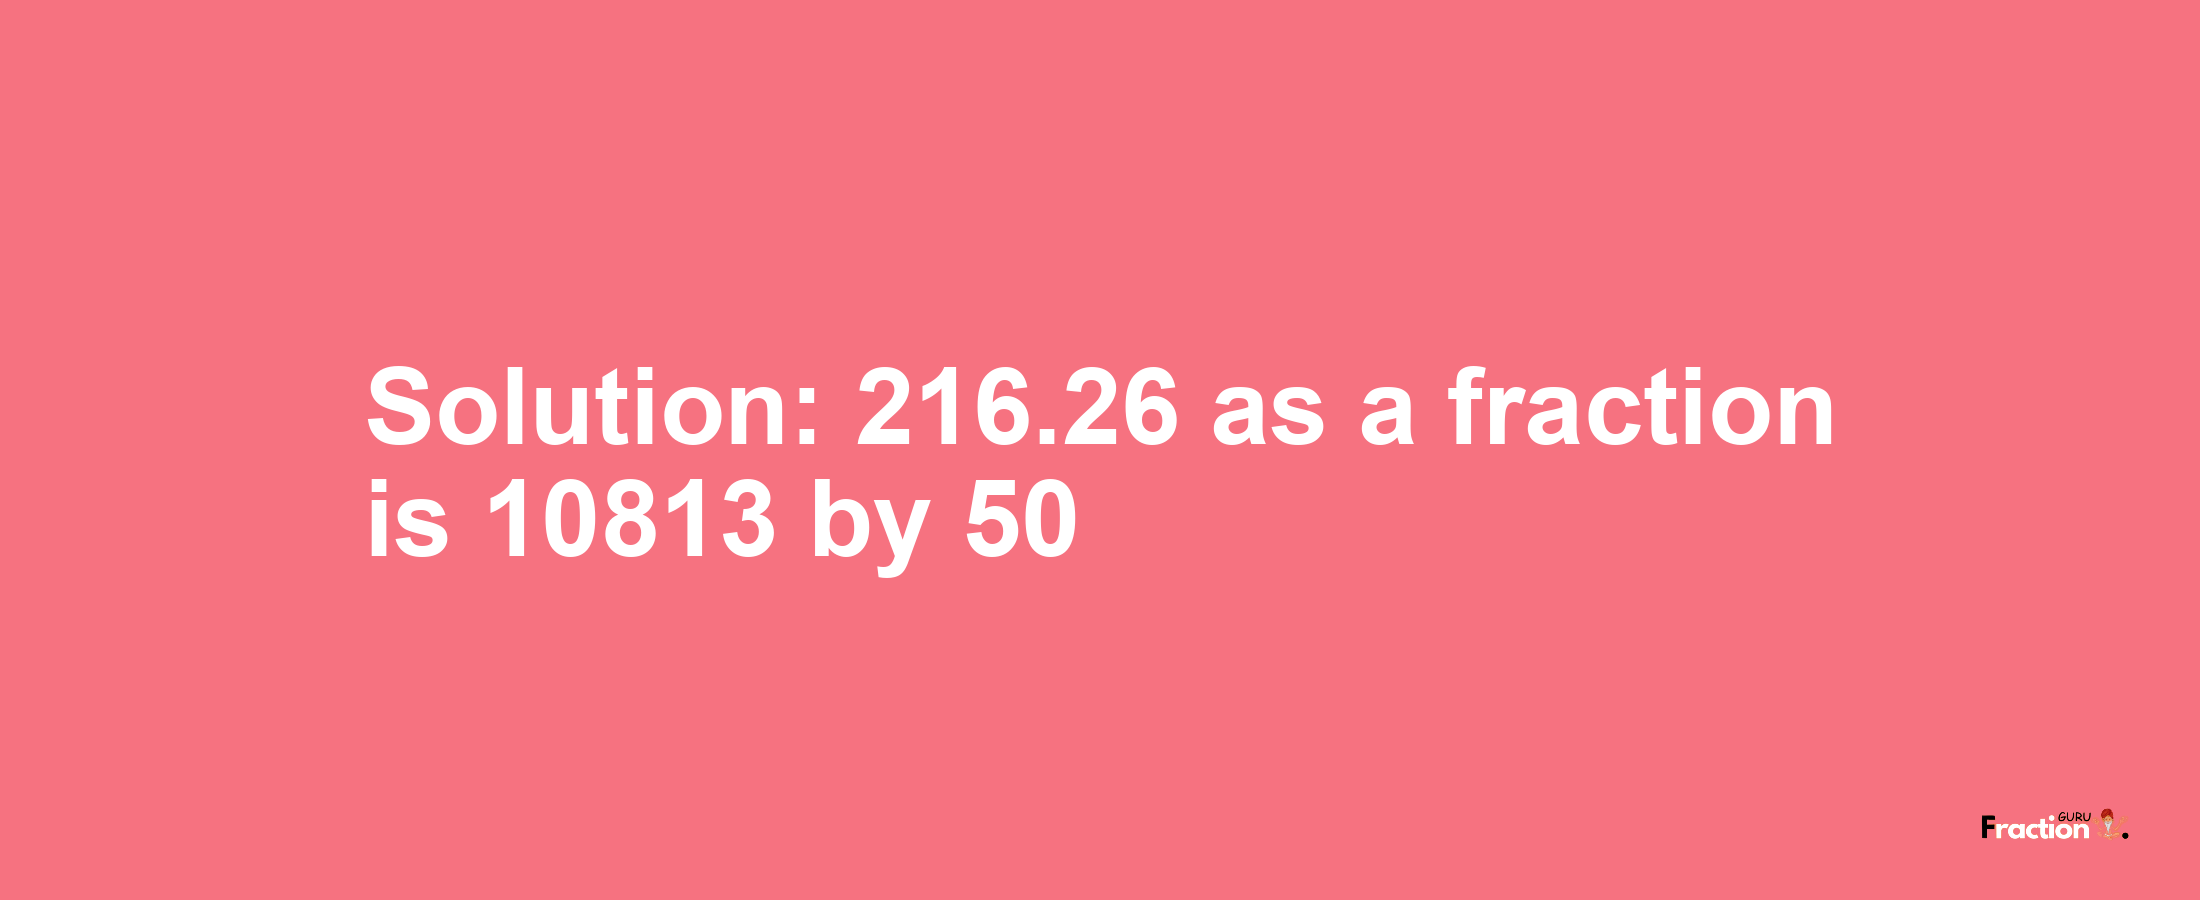 Solution:216.26 as a fraction is 10813/50